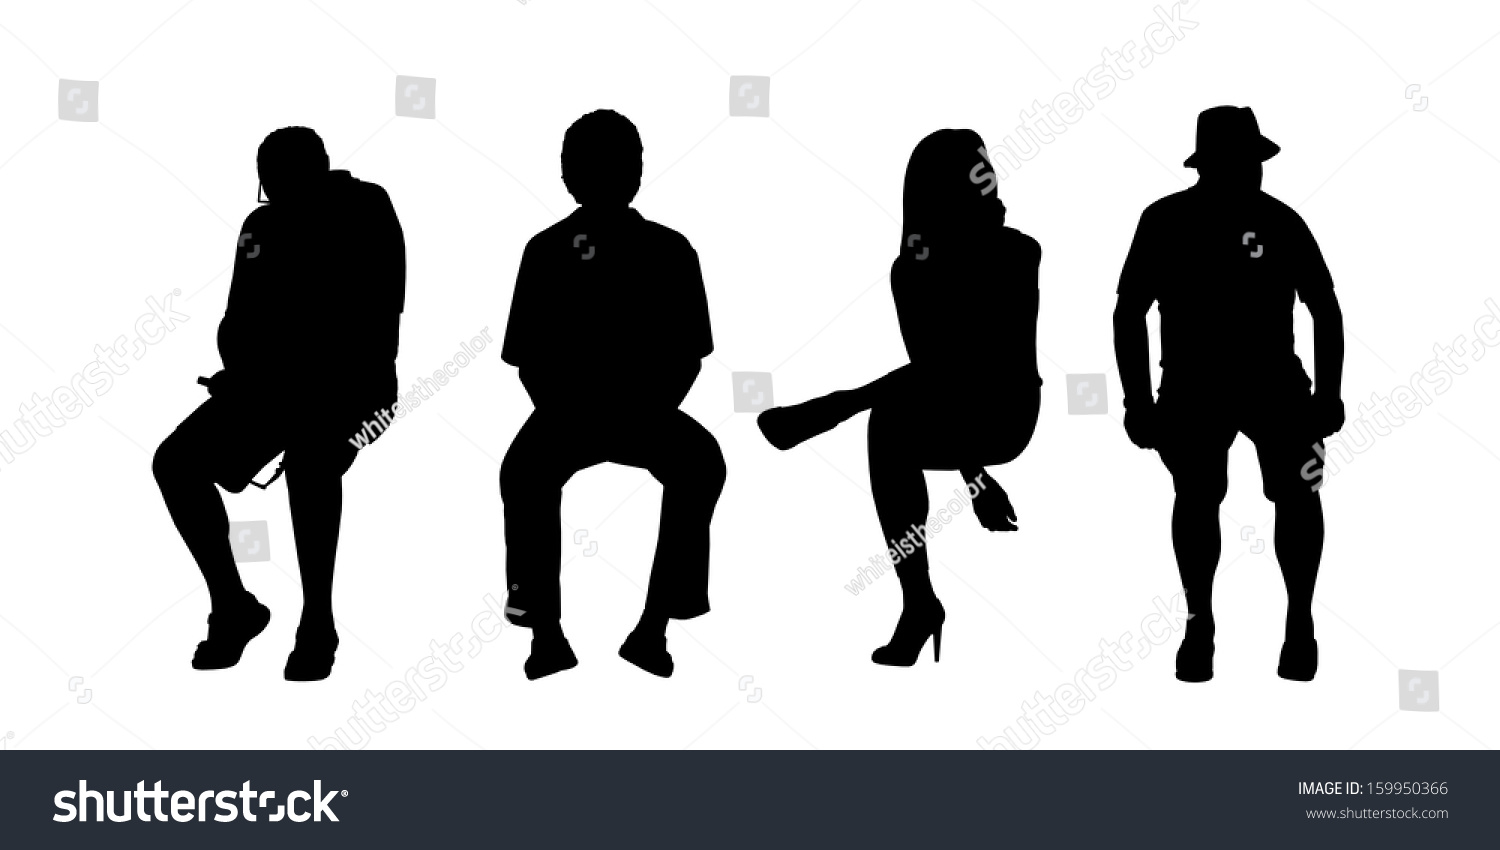 Black Silhouettes People Different Sex Age Stock Illustration 159950366 Shutterstock